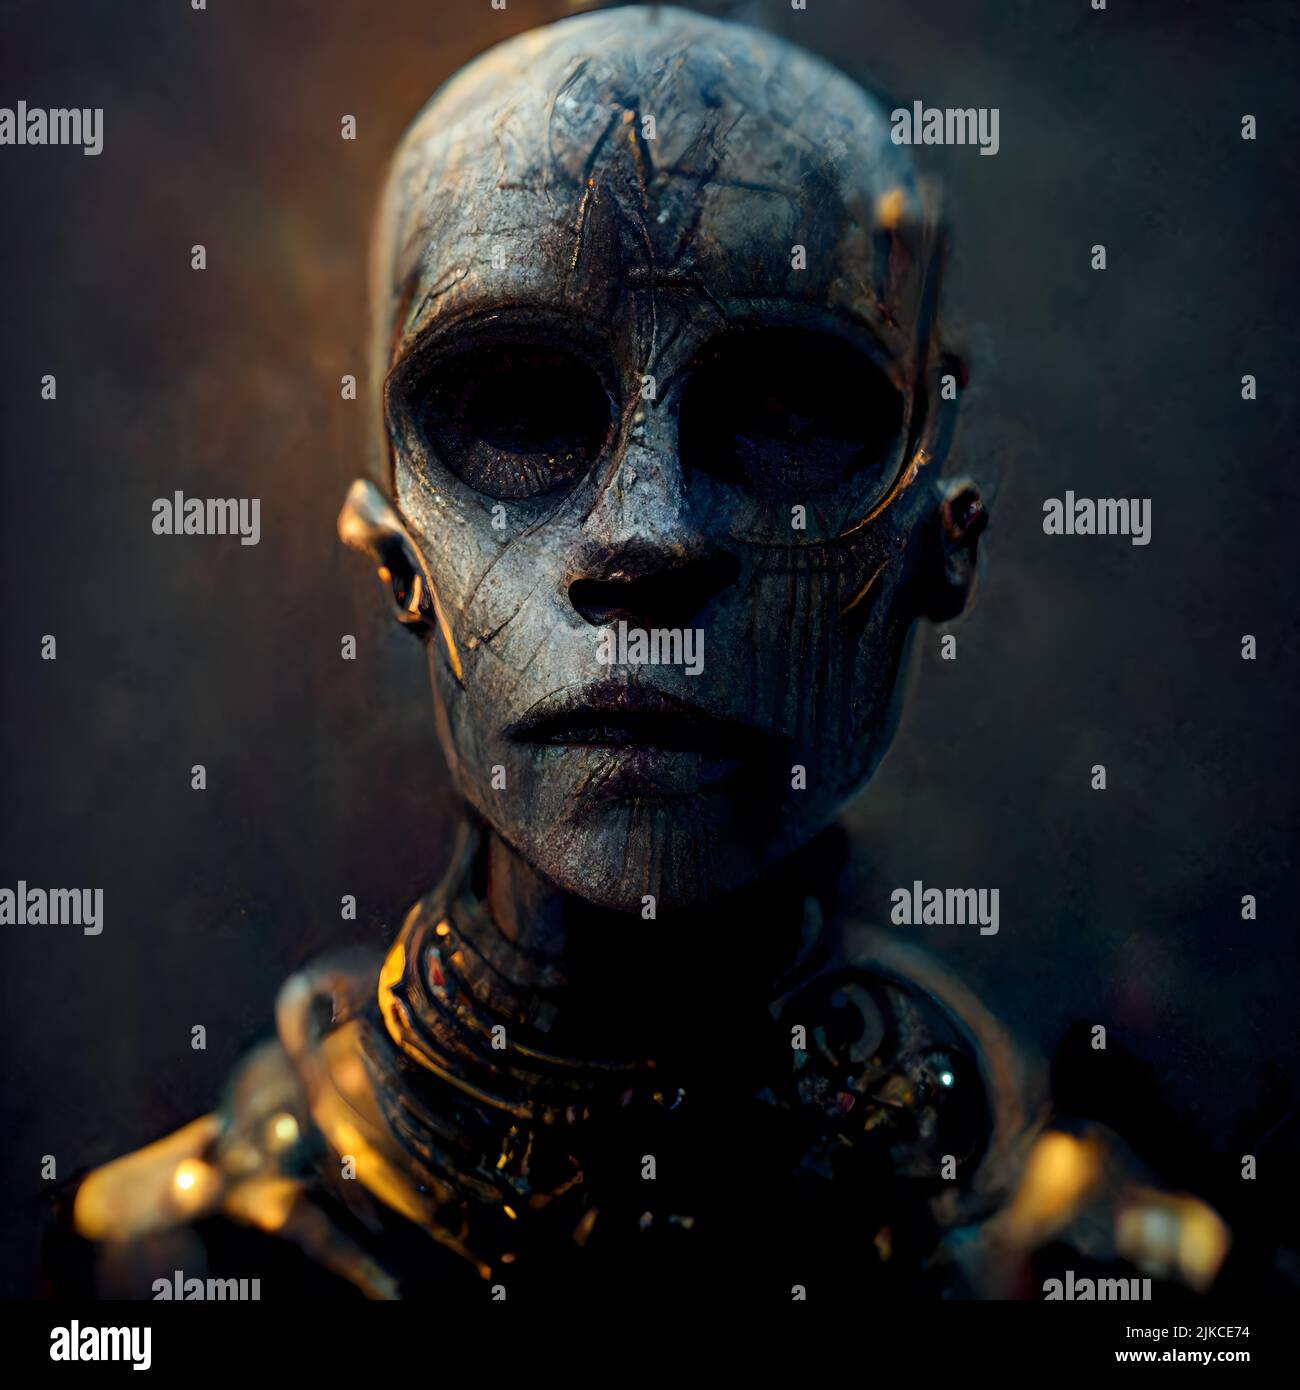 Alien creature Portrait 3D illustration with dramatic lighting reflecting the cultural heritage of another world of Demonic paranormal creatures Stock Photo